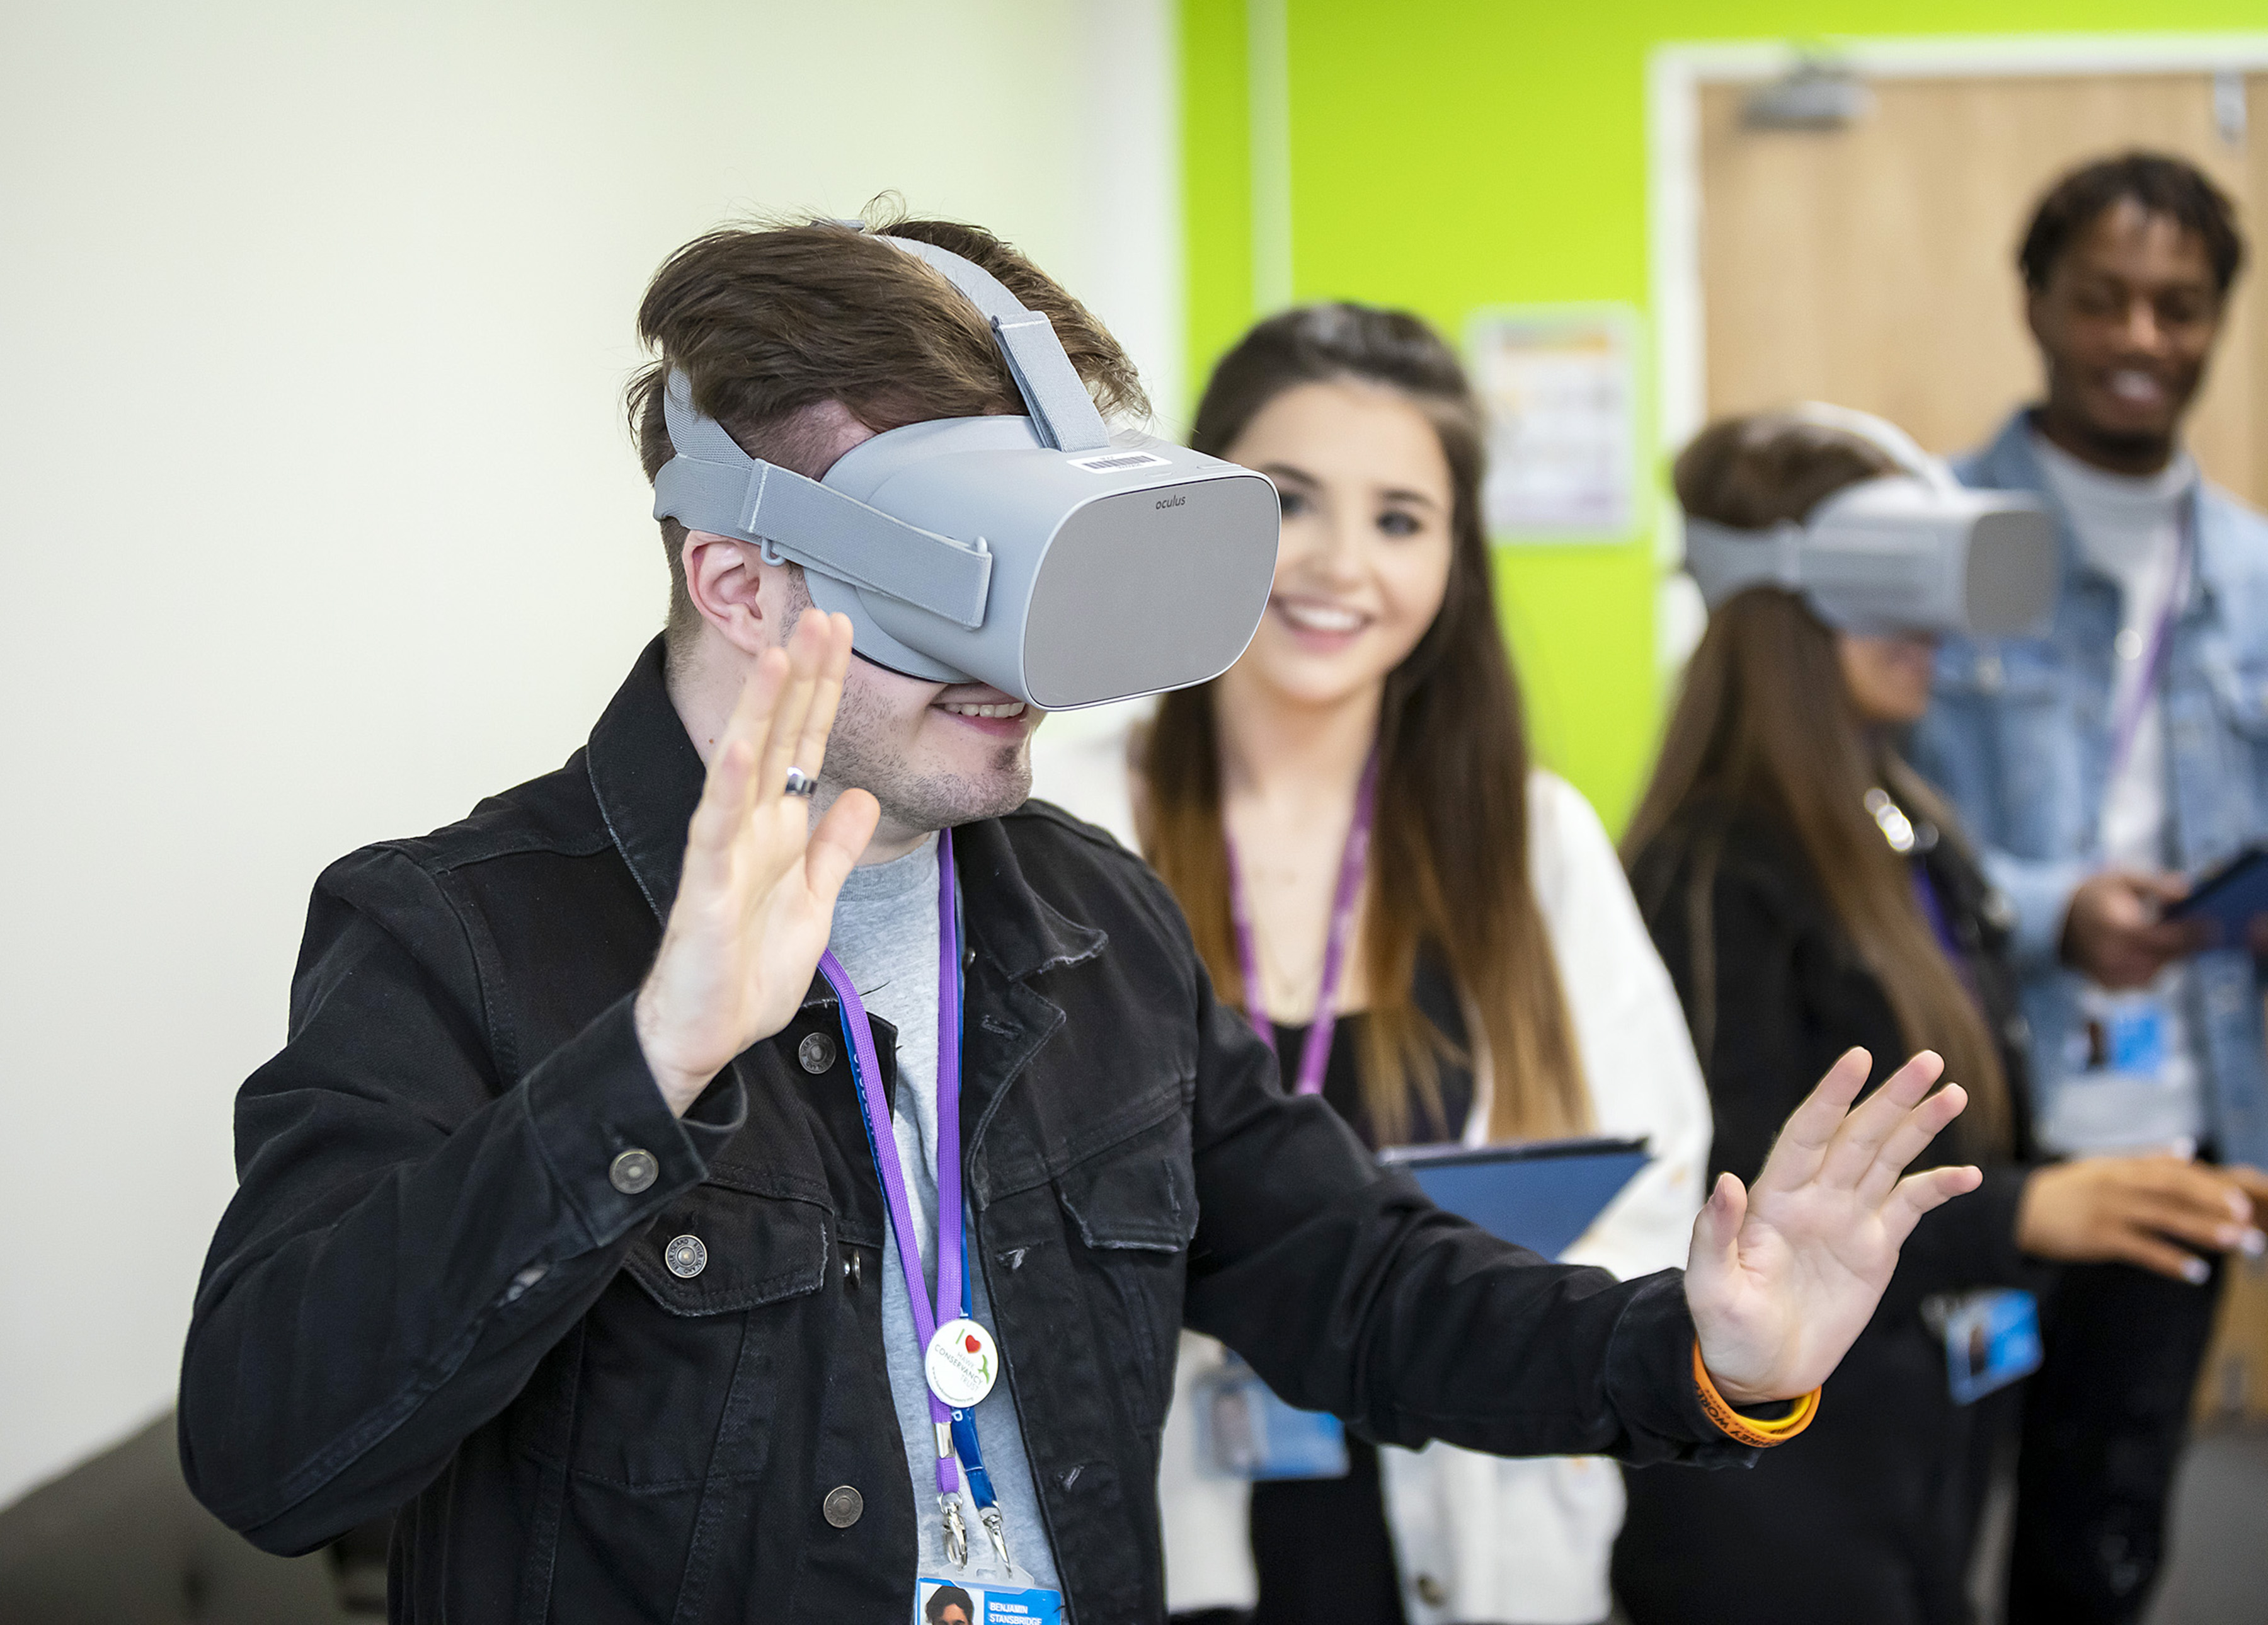 Young person wearing a VR headset